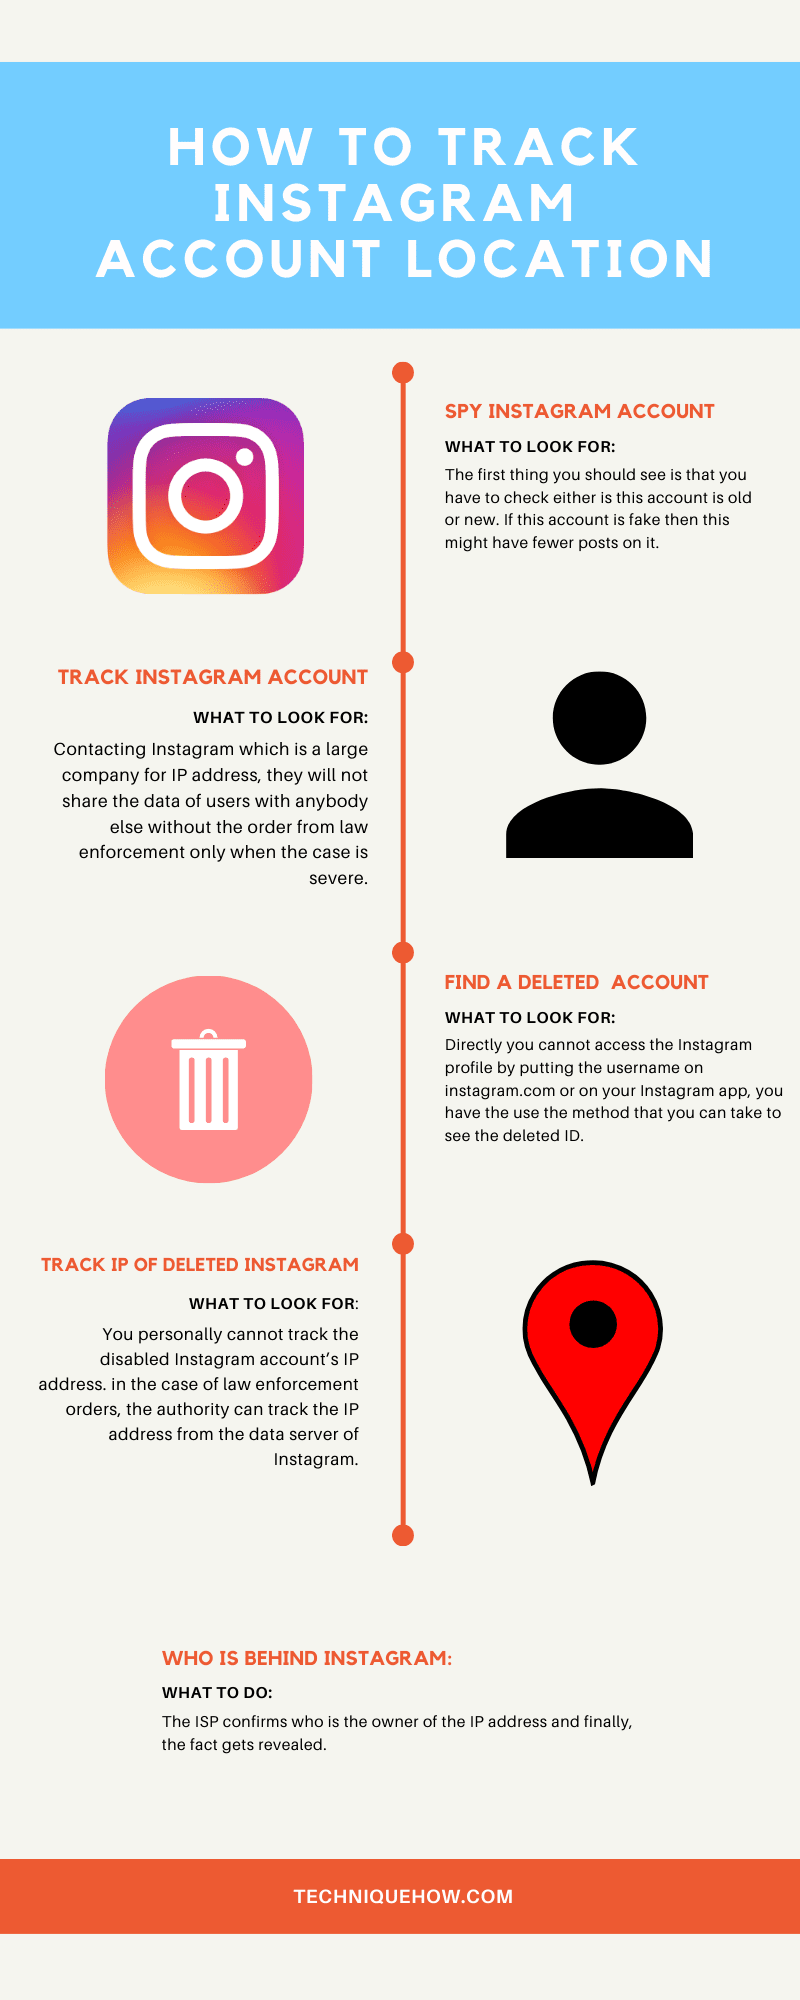 Infographic_How to Track Instagram Account Location